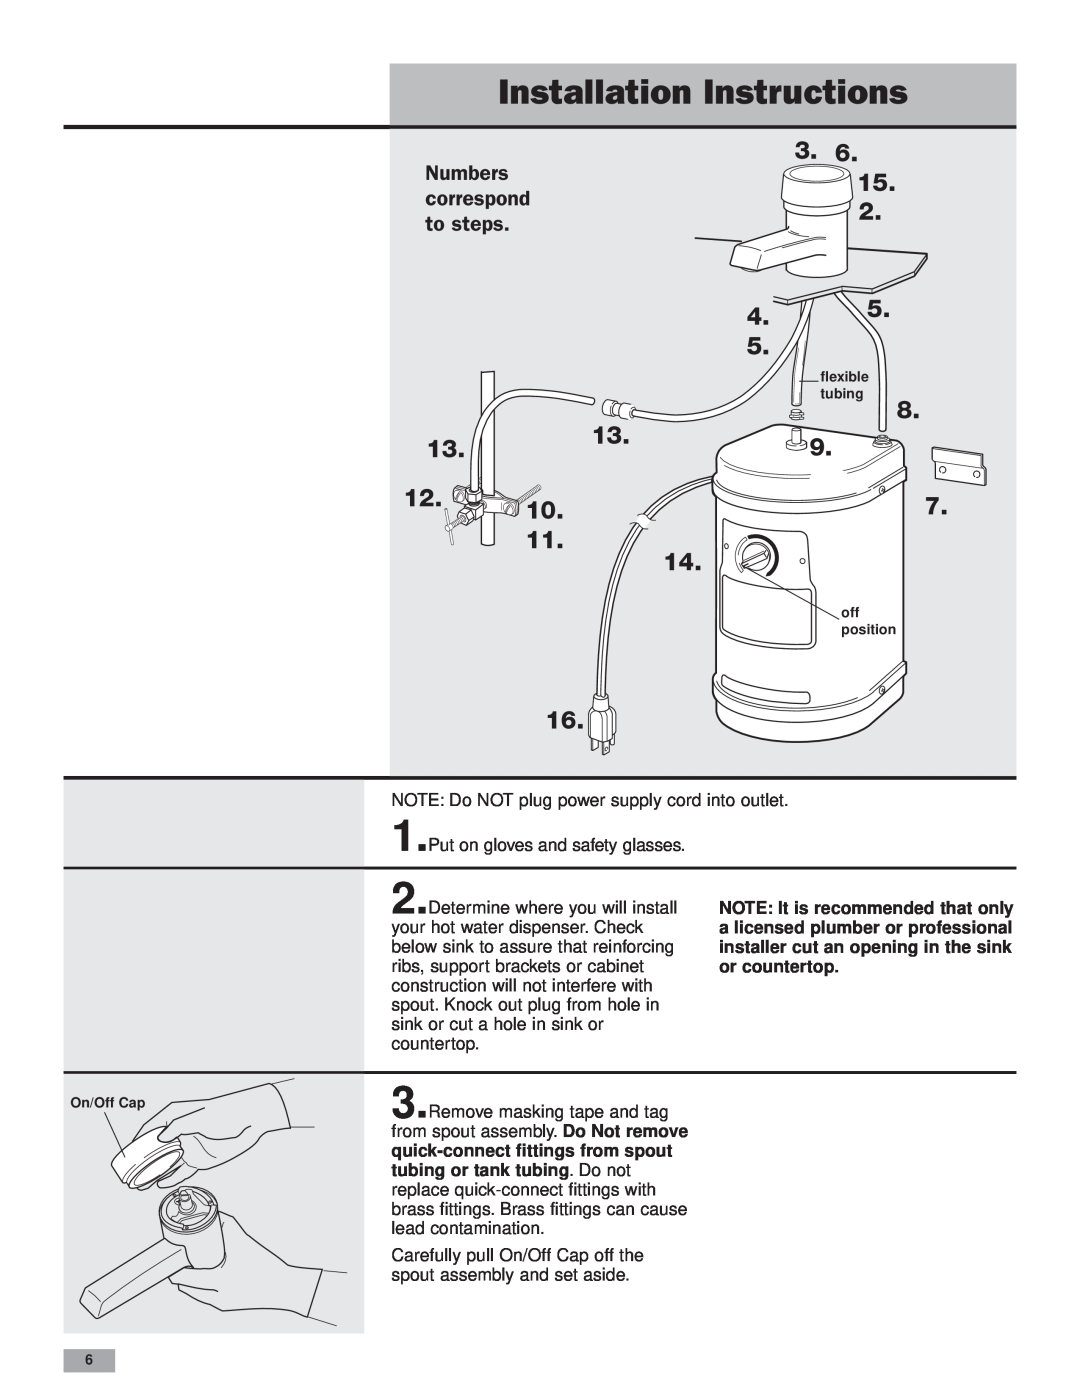 KitchenAid Instant Hot Hot Water Dispenser Installation Instructions, Numbers 15. correspond, to steps, or countertop 